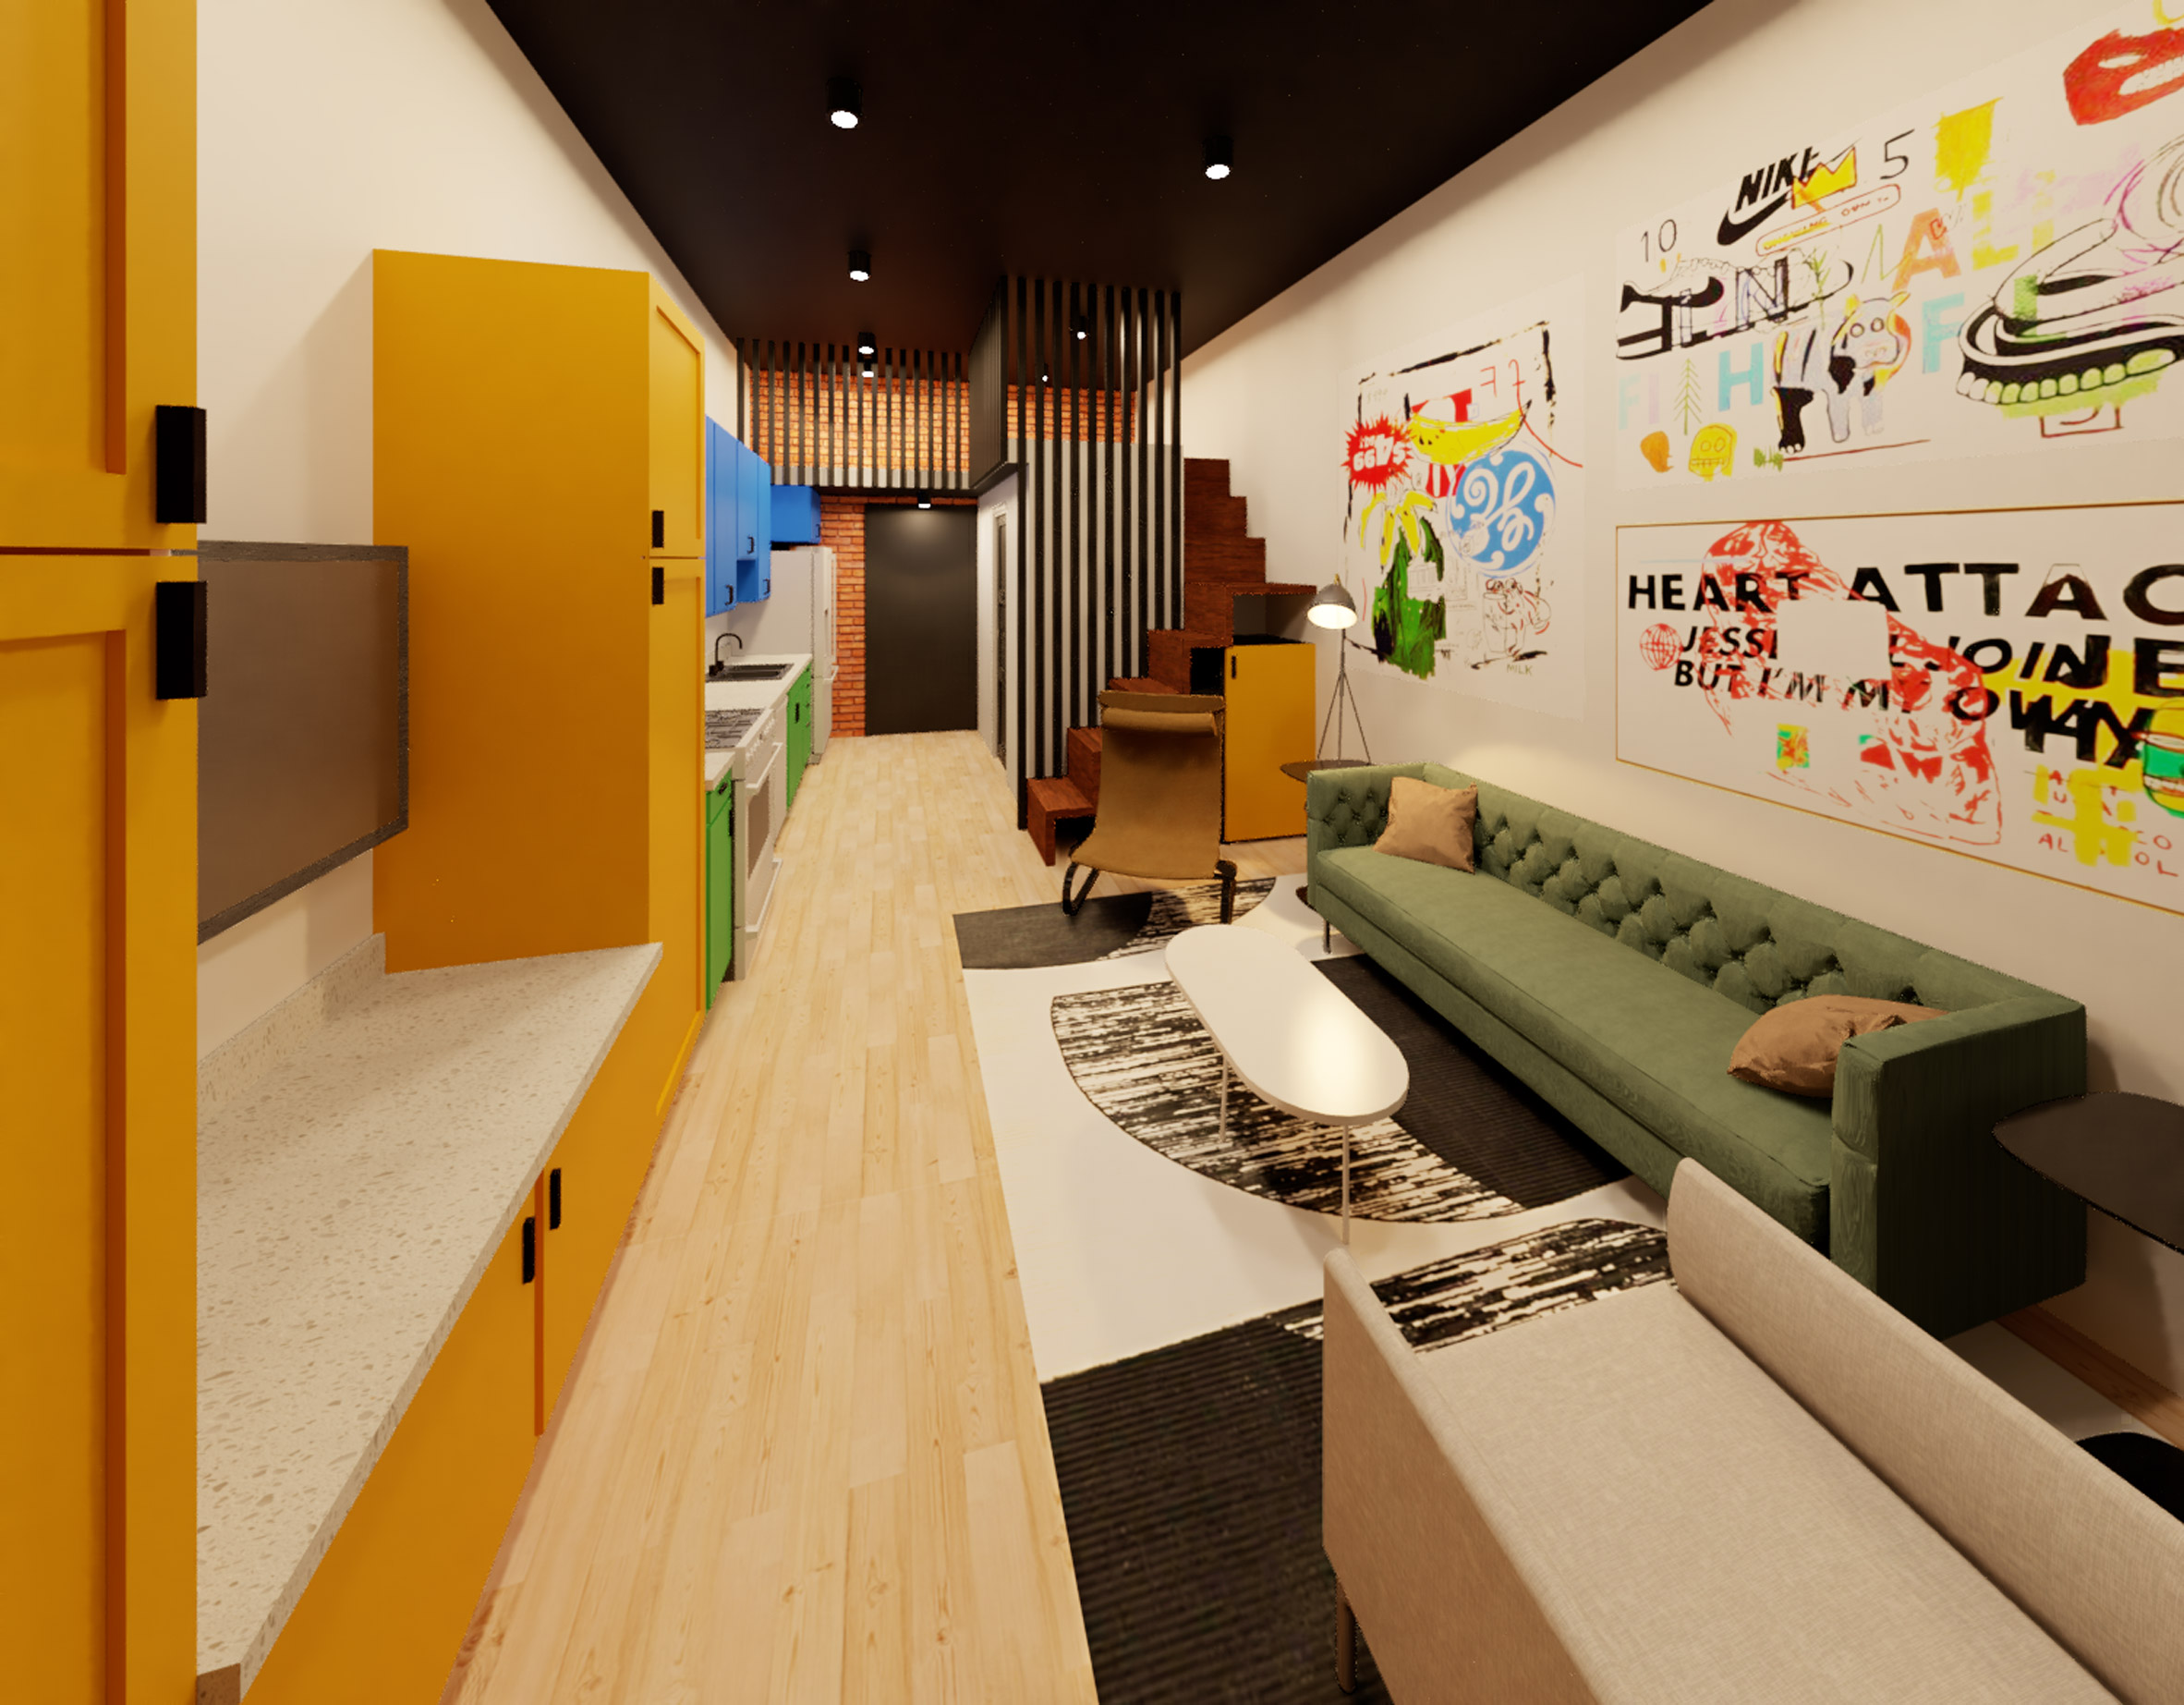 Render of interior living space with yellow kitchen units and a green sofa